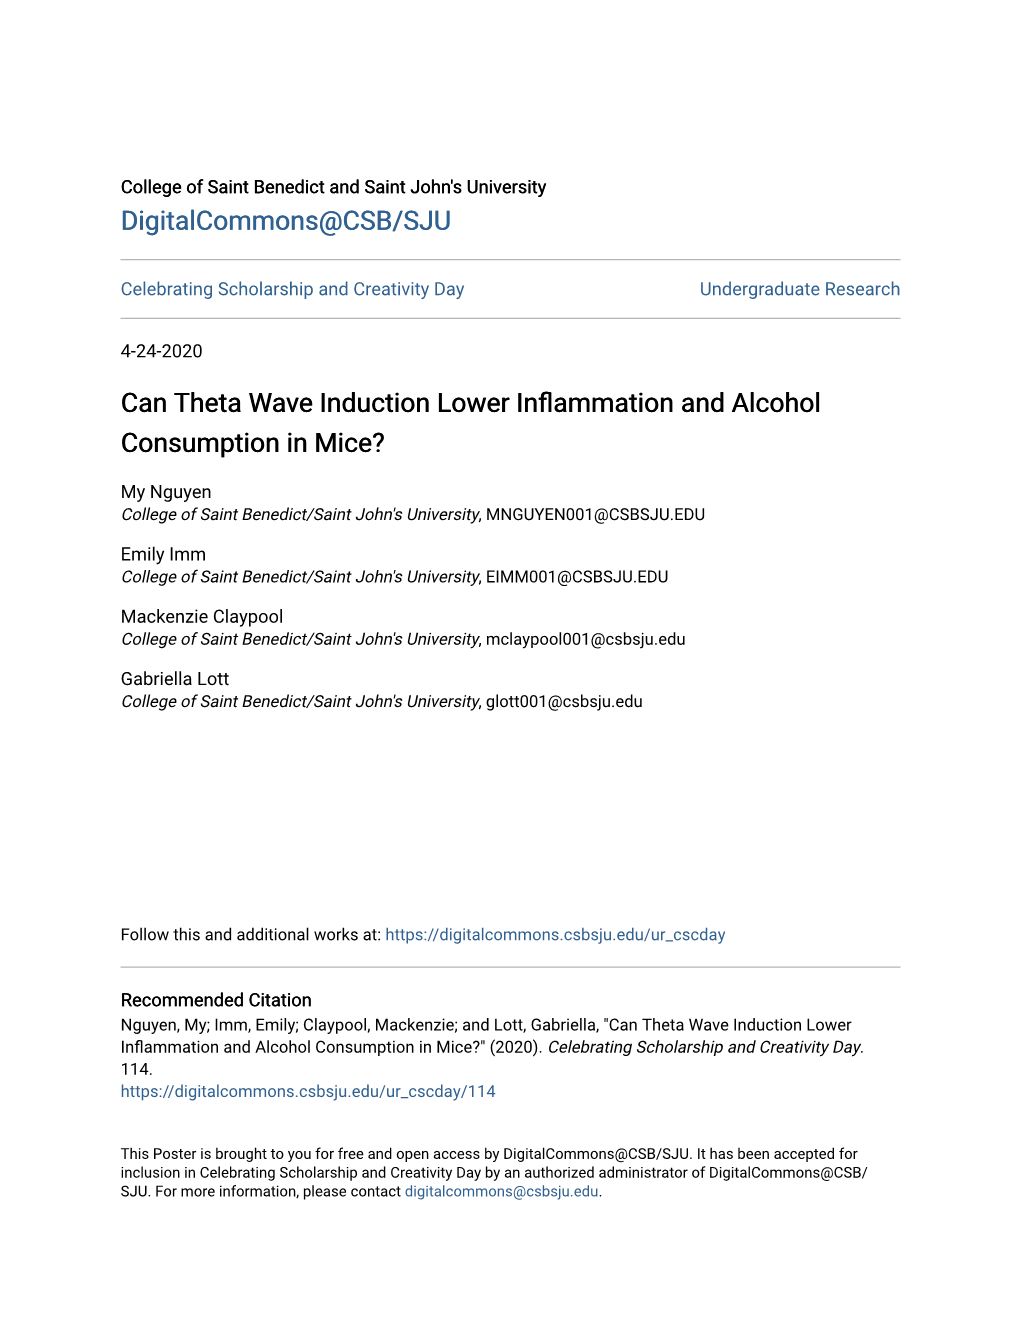 Can Theta Wave Induction Lower Inflammation and Alcohol Consumption in Mice?